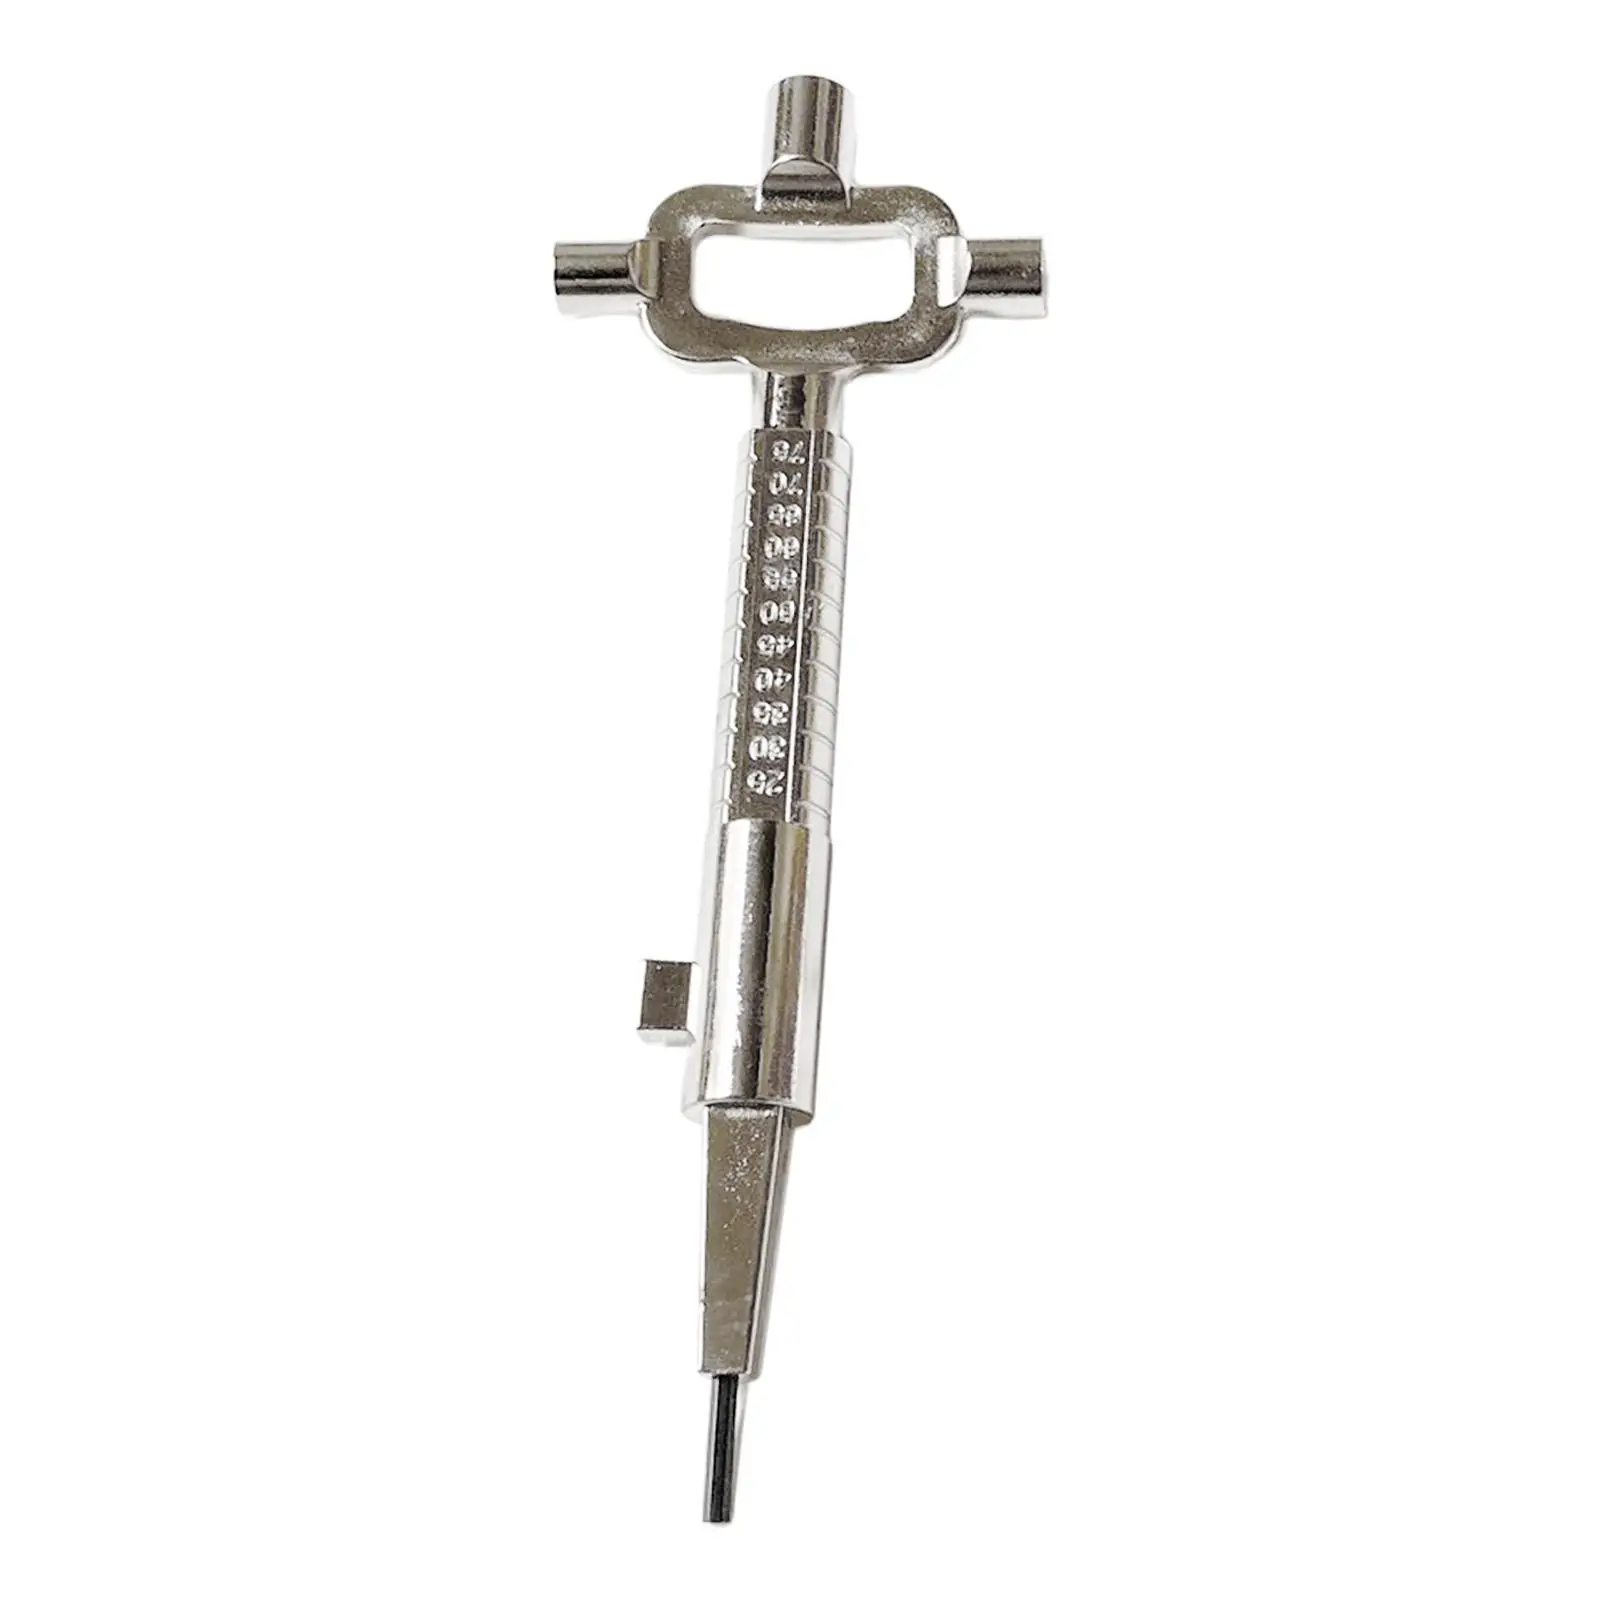 Cylinder Measuring Key Bottle Opener Polished Spindle and cam Operater Multifunctional Wrench Cylinder Gage Multi Tool